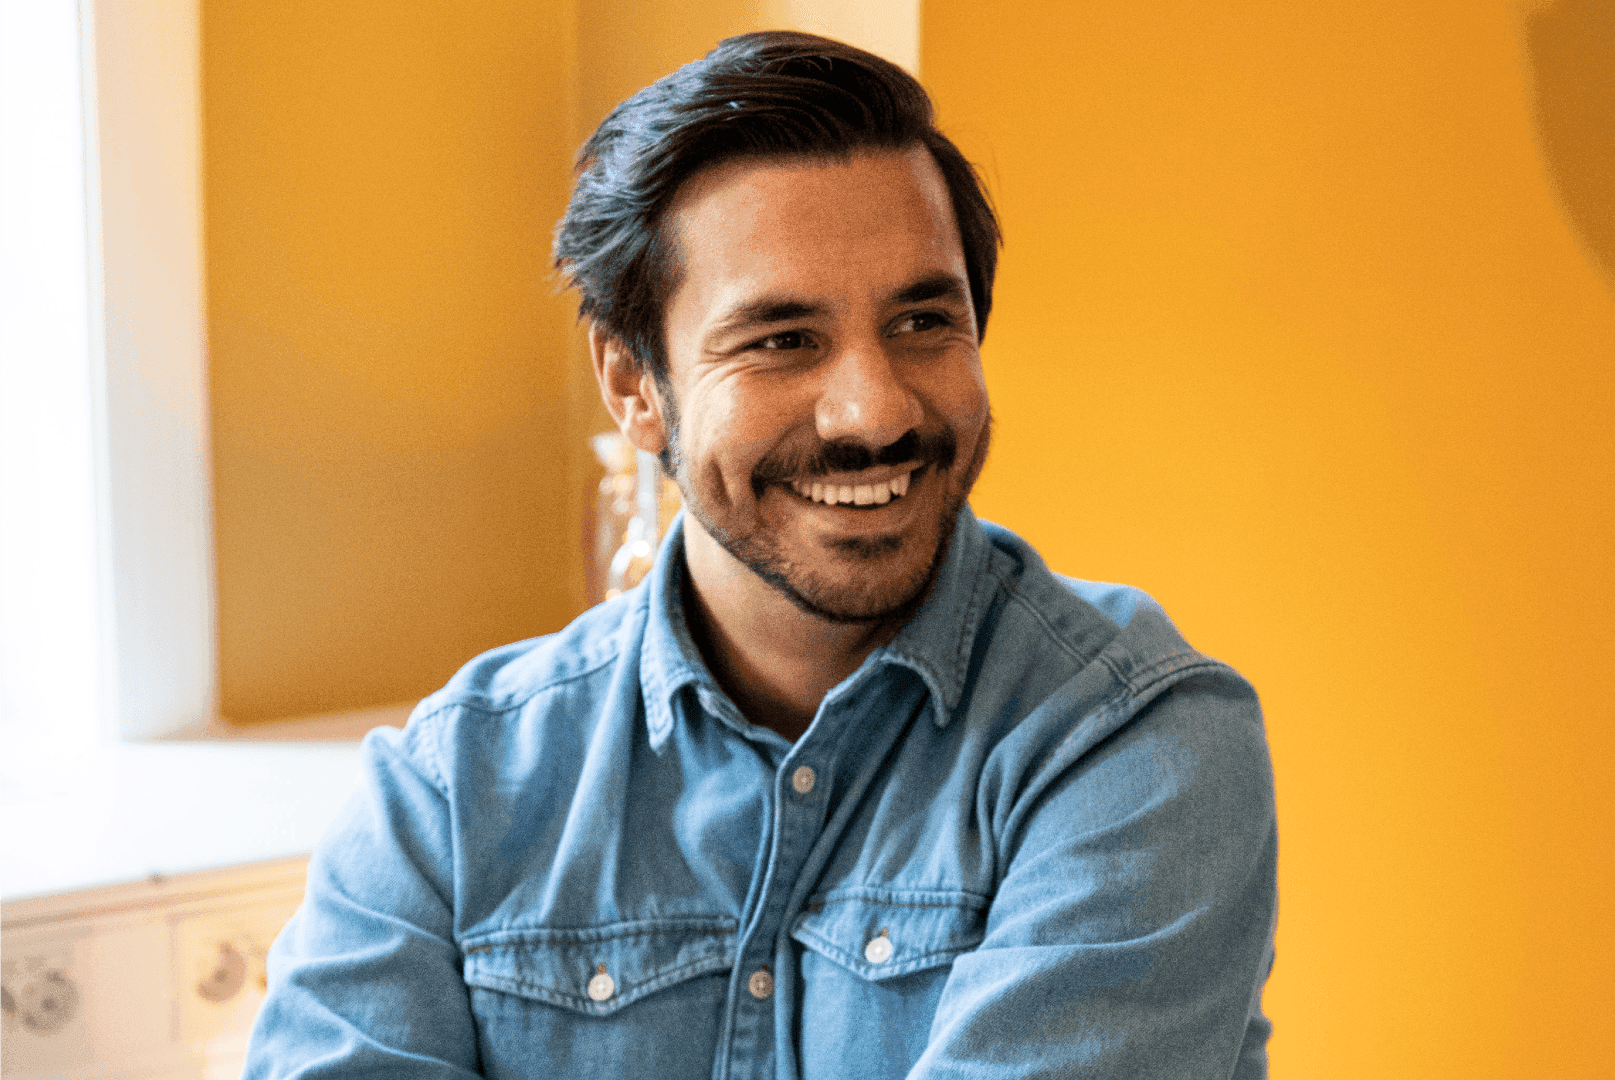 Mikael Hussain, co-founder and CEO of Anyfin